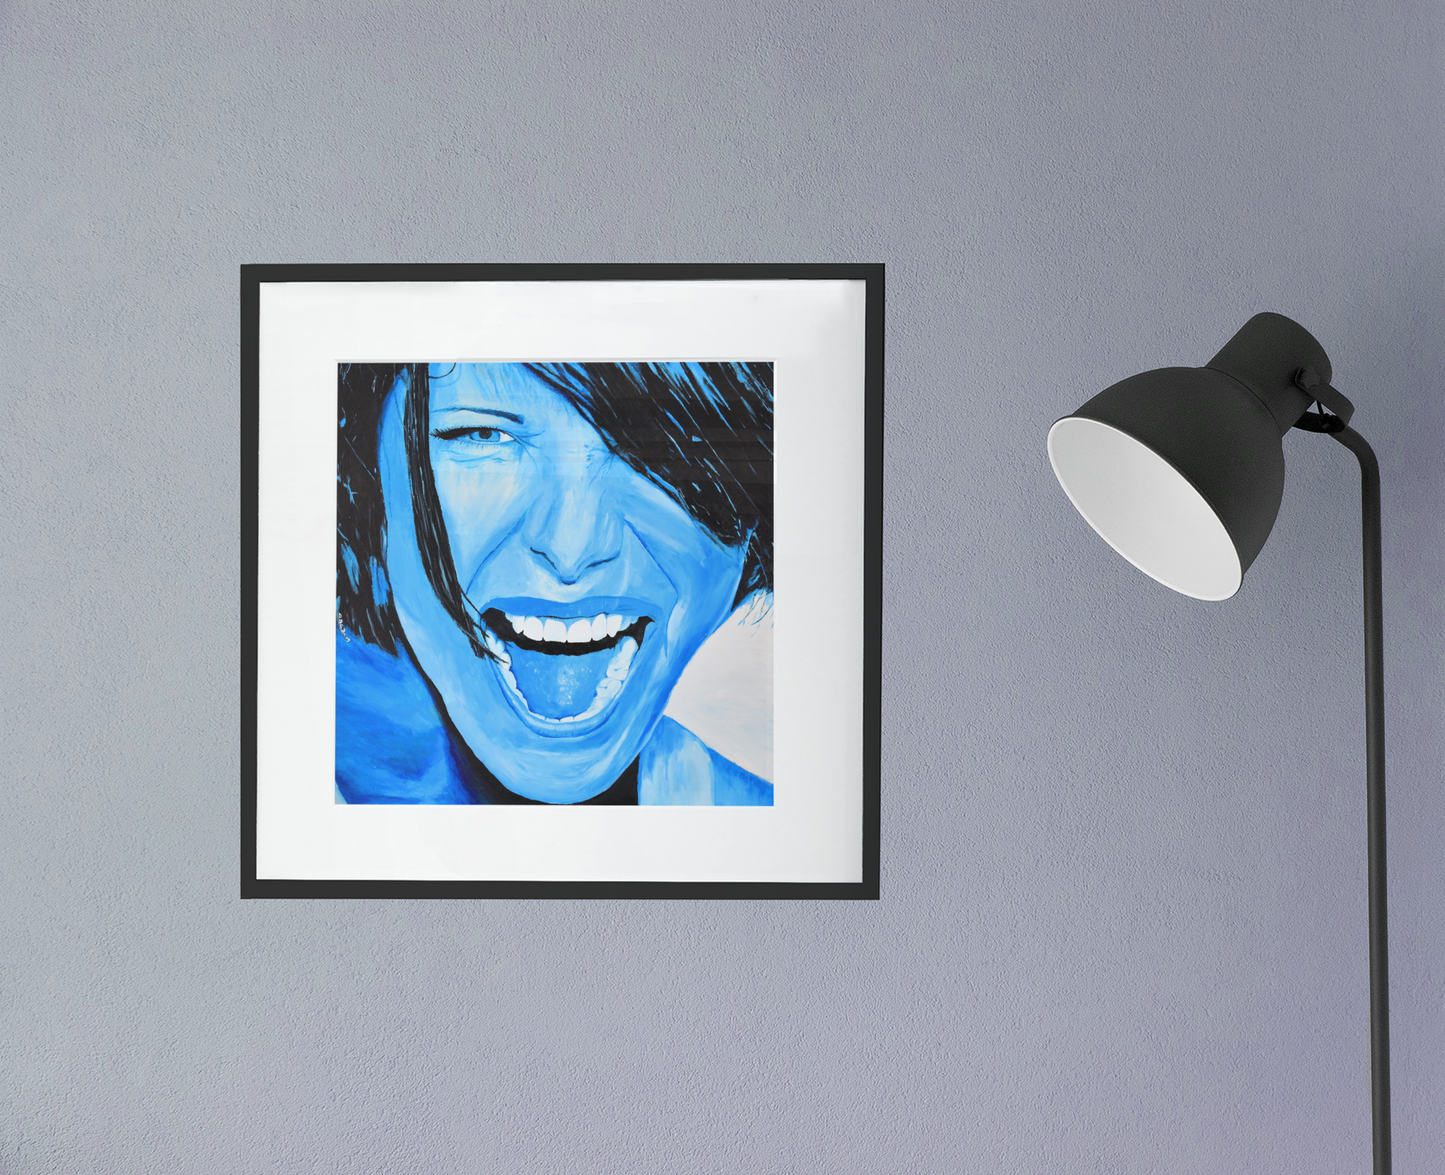 A bright blue giclee art print of a passionate woman showing emotions, woman portrait art, framed in black with white matting, hanging on a wall next to a lamp